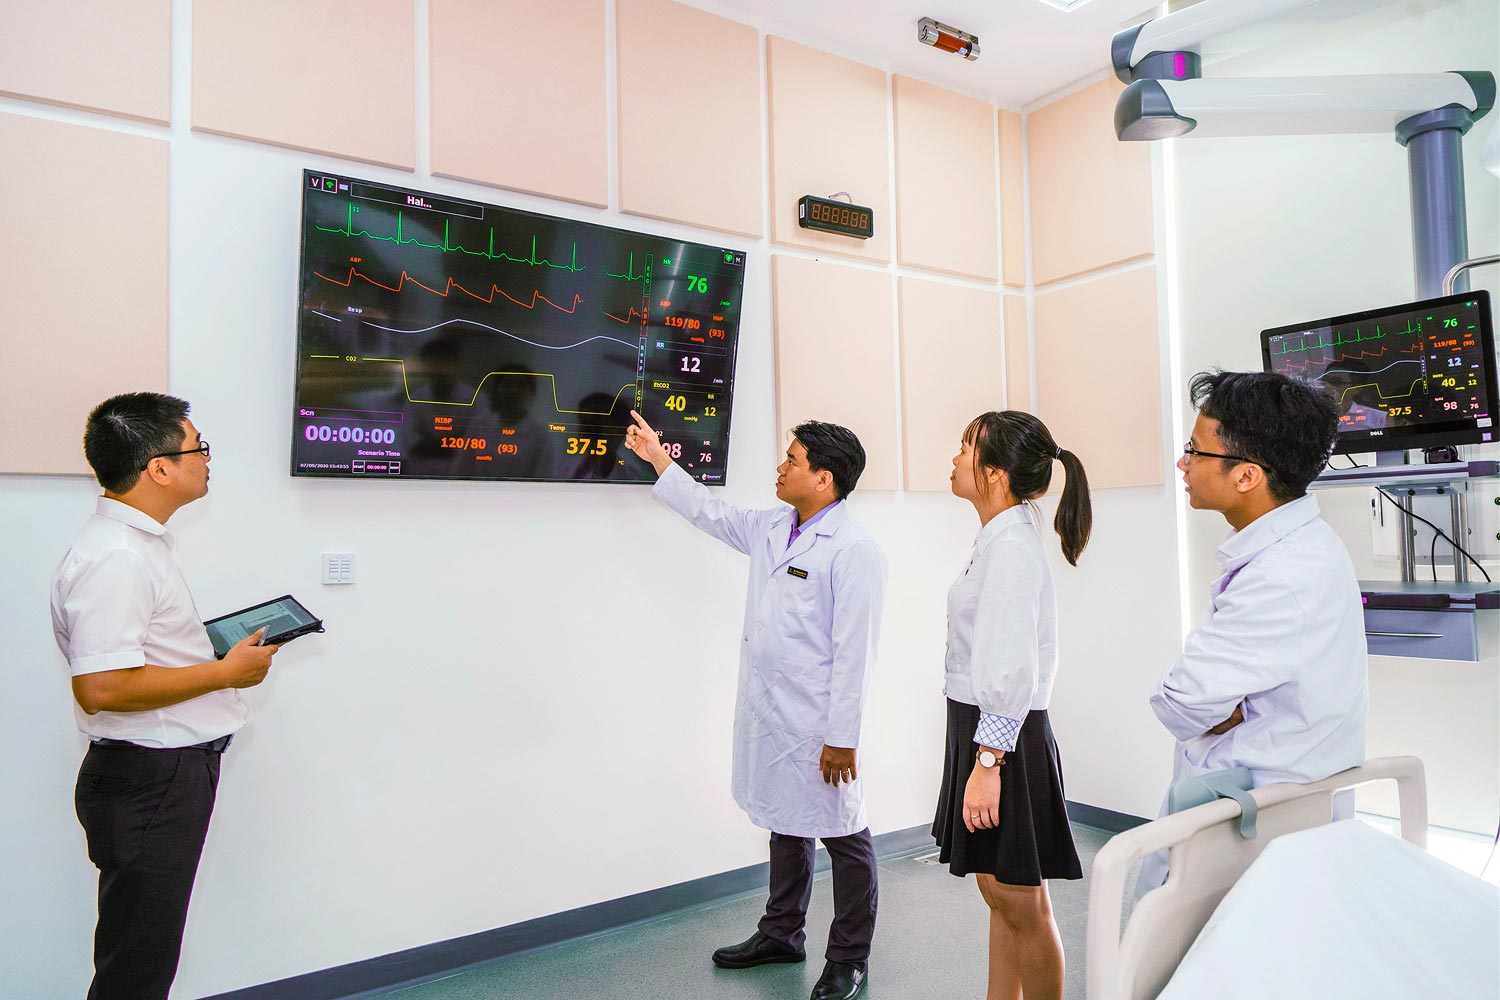 Medical data is sent to the station display in real-time, enabling students to practice their diagnostic skills and collaborate on the best treatment option.